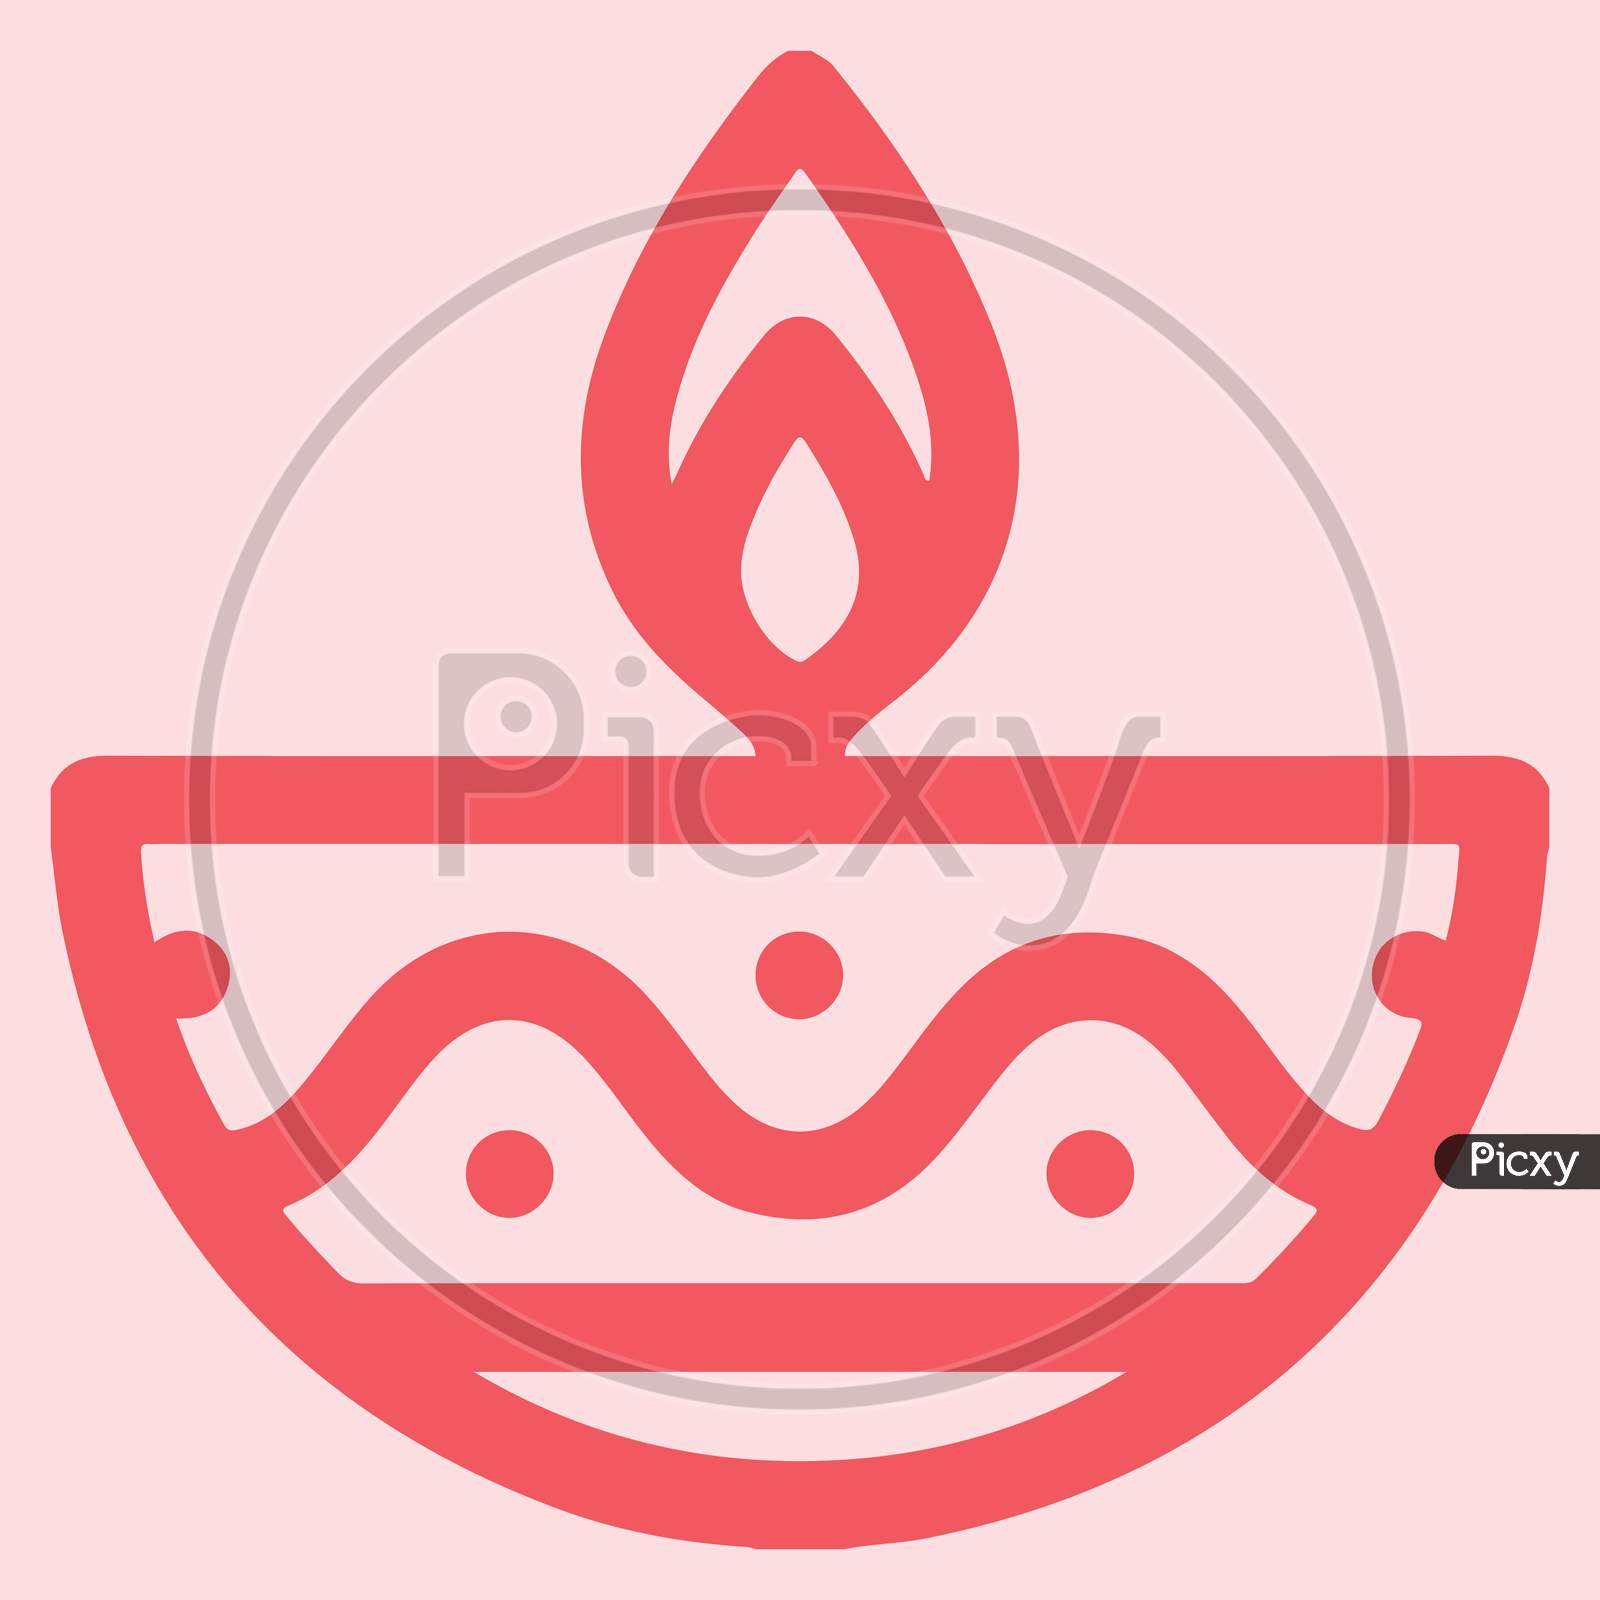 2022 New Easy Beautiful Happy Diwali Drawings Paintings Sketches Images  Pictures With Diya Drawing for Kids and Teachers